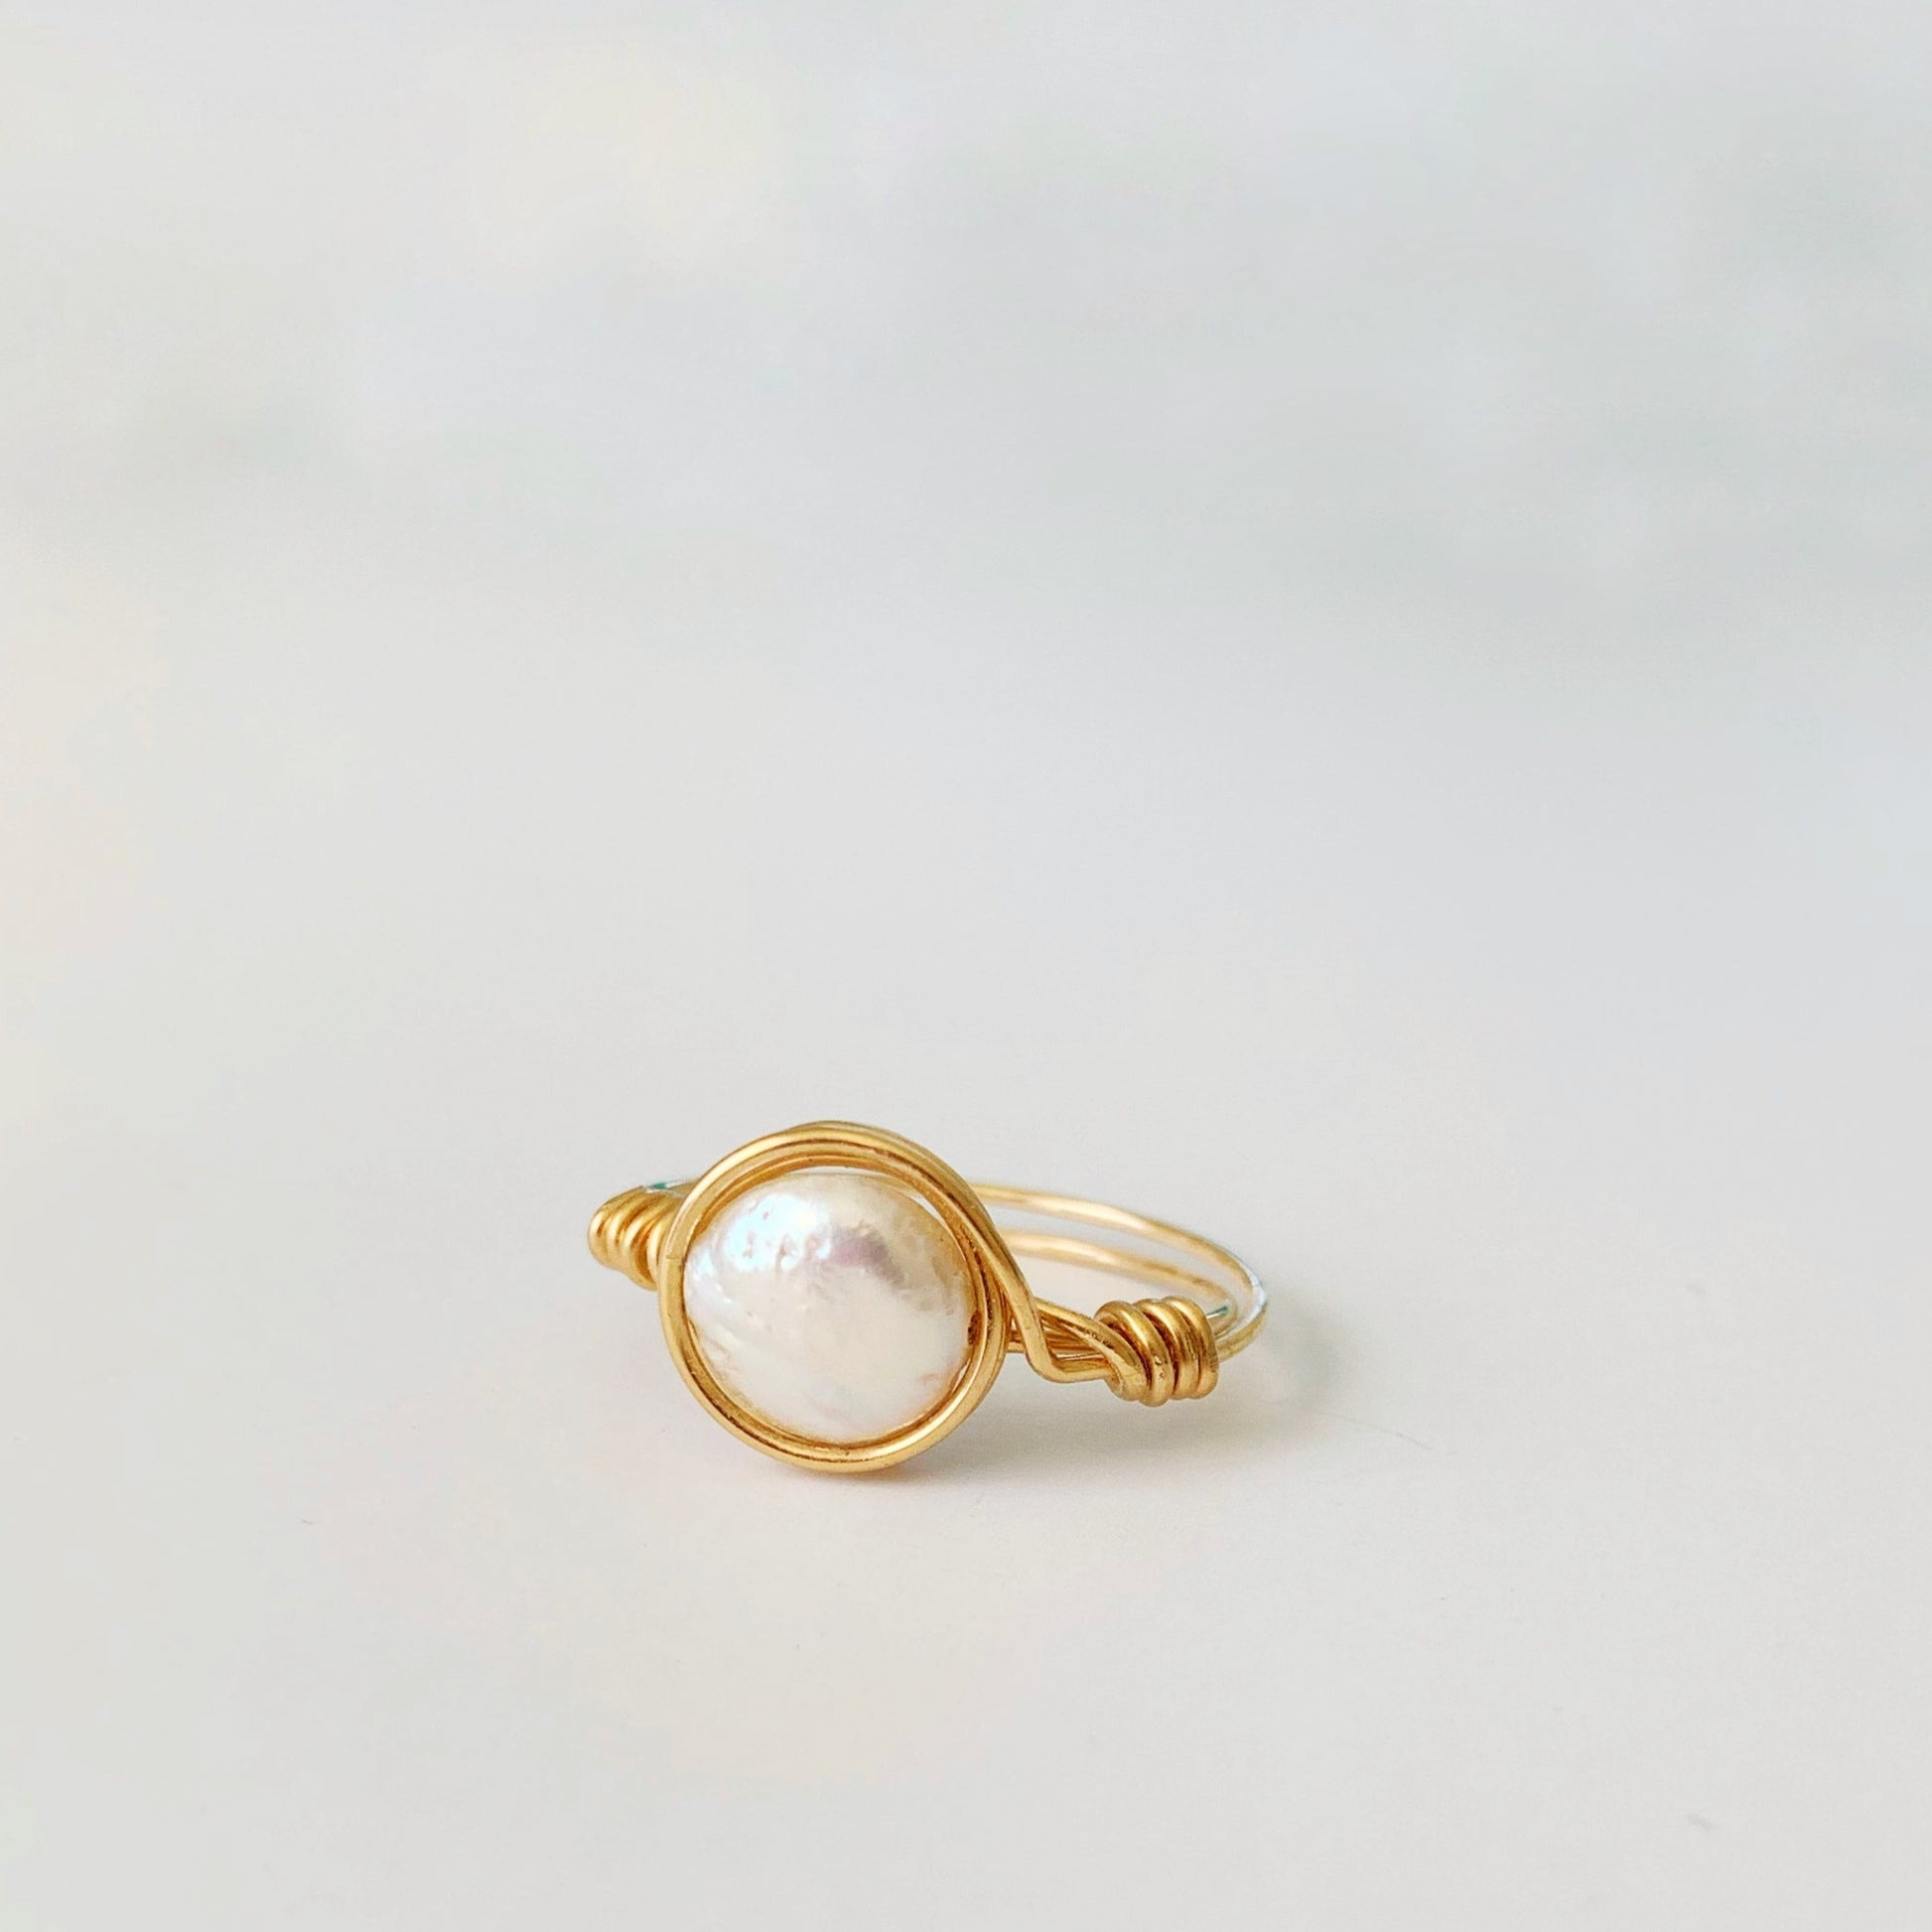 Newport pearl ring by mermaids and madeleines is a 14k gold filled wire wrapped ring with a small coin pearl. this one is photographed on a white surface